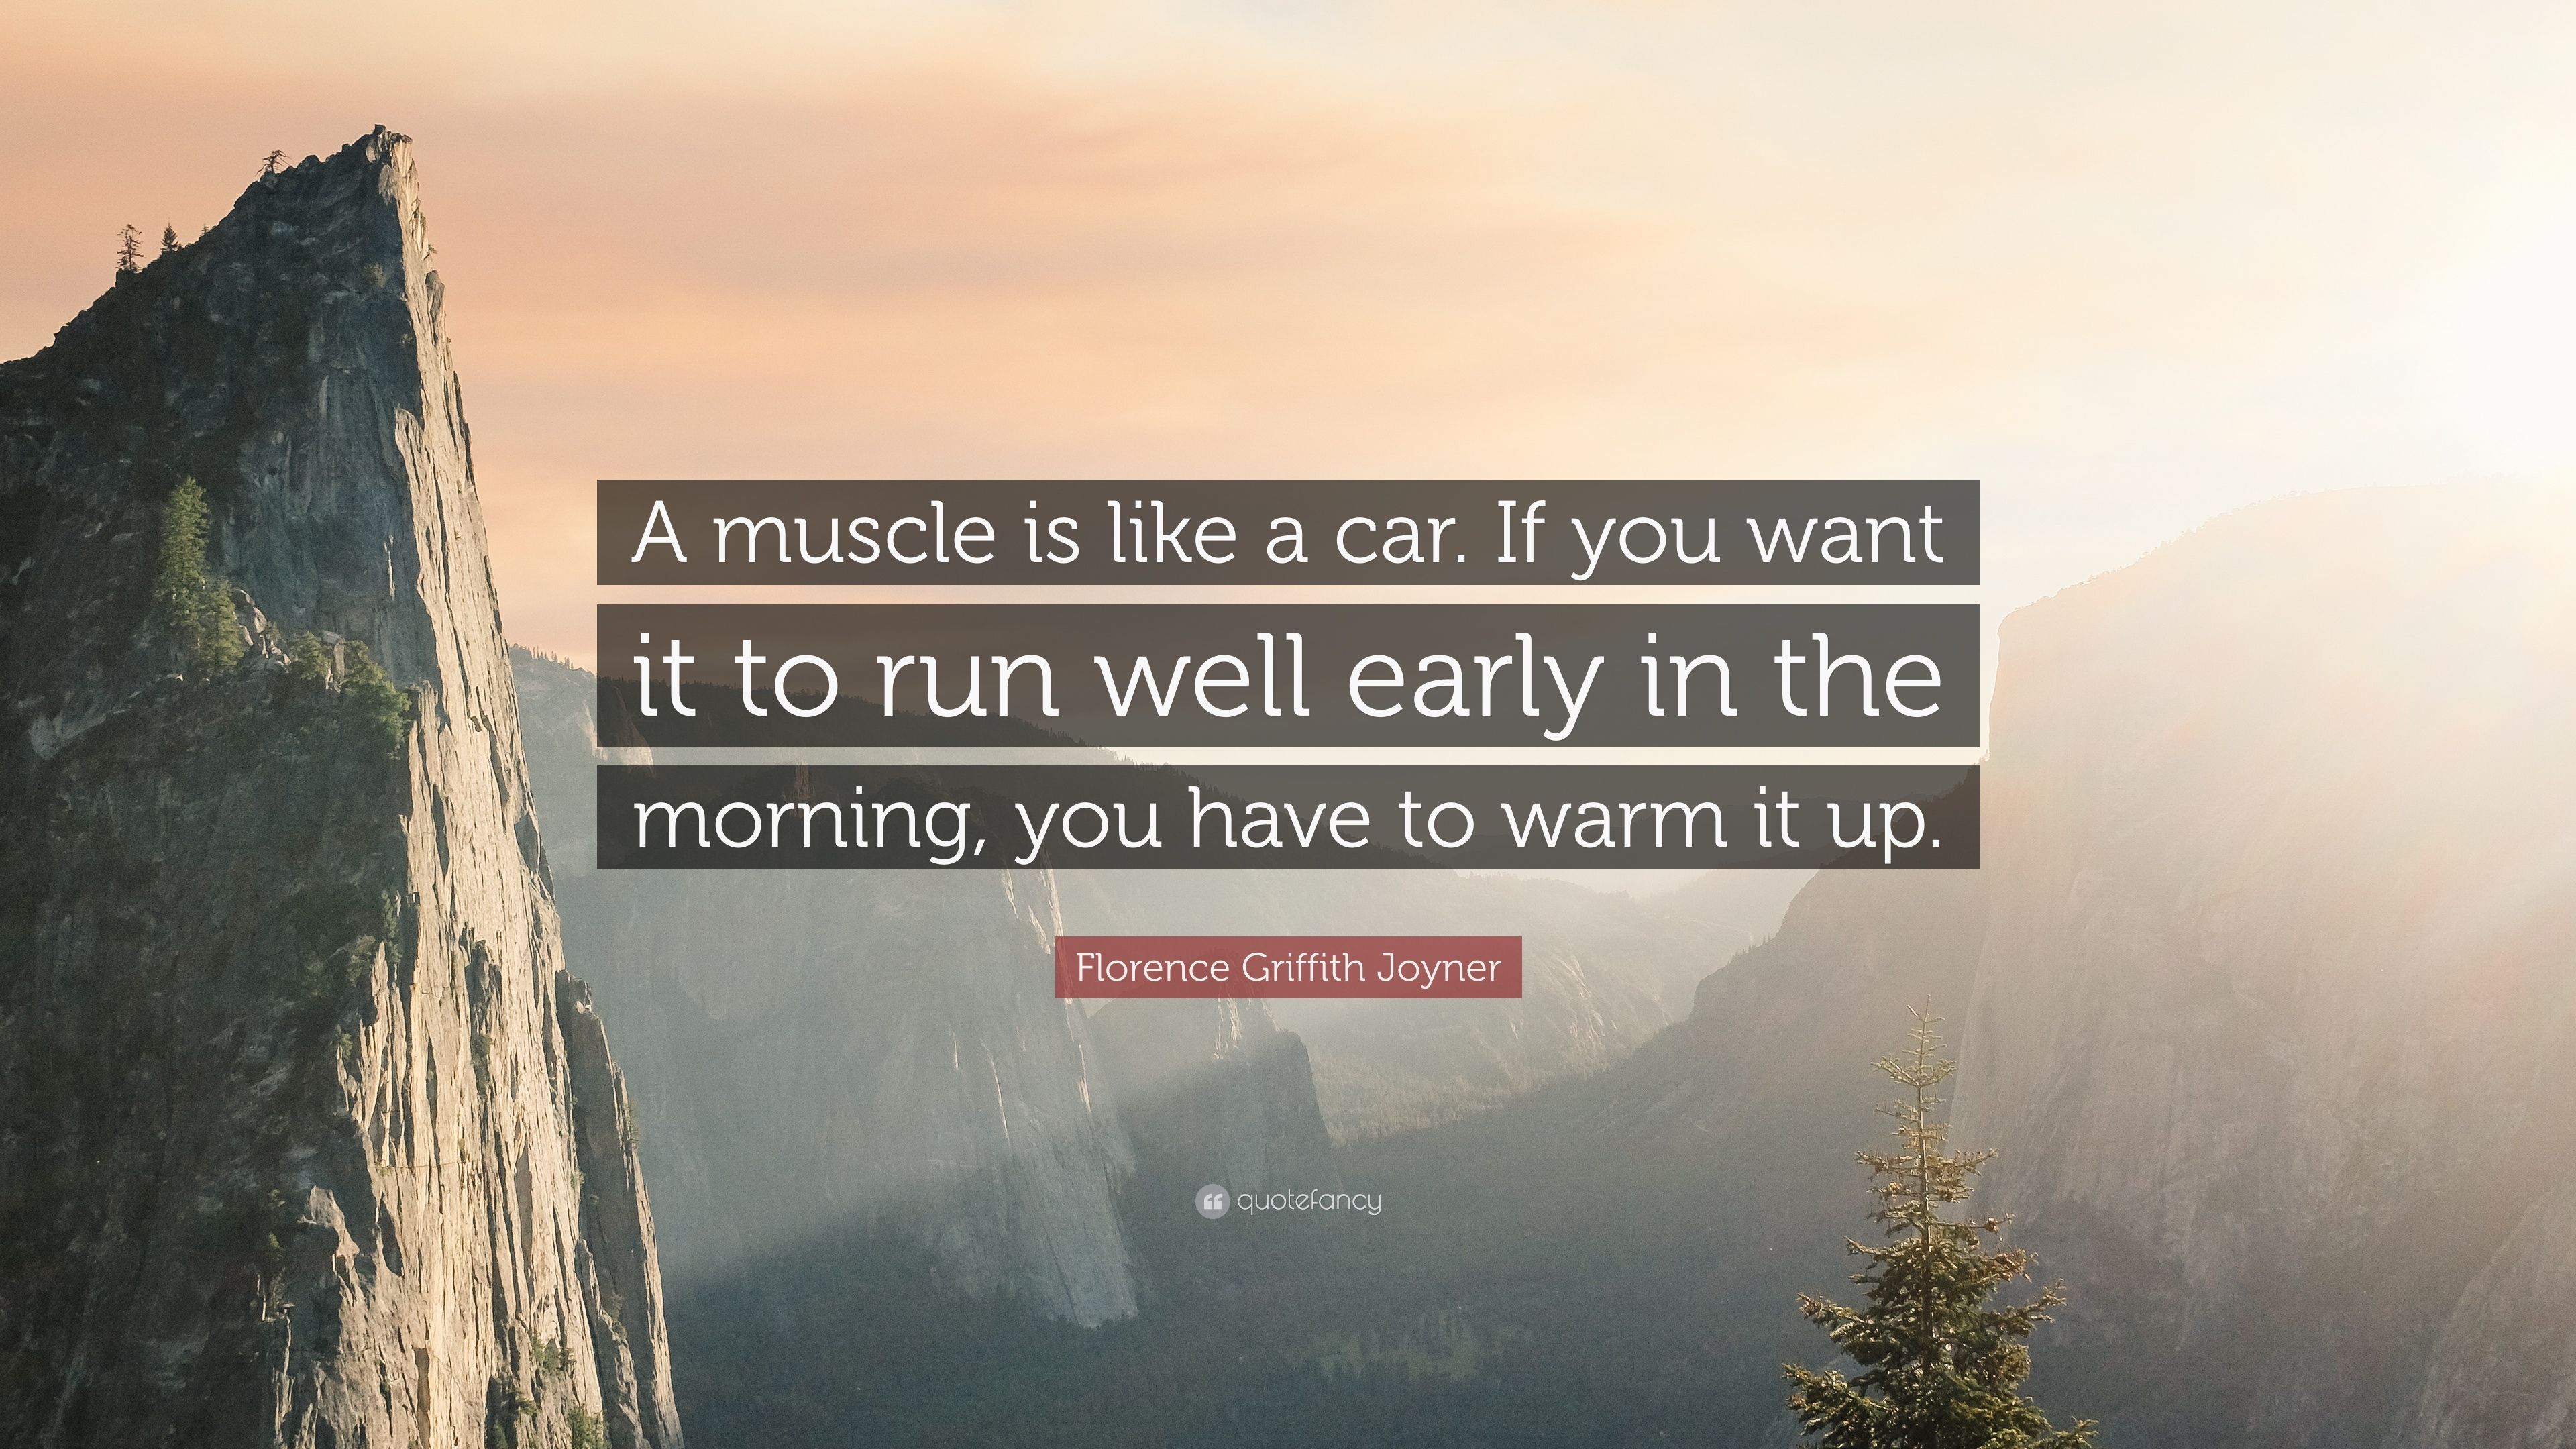 Florence Griffith Joyner Quote: “A muscle is like a car. If you